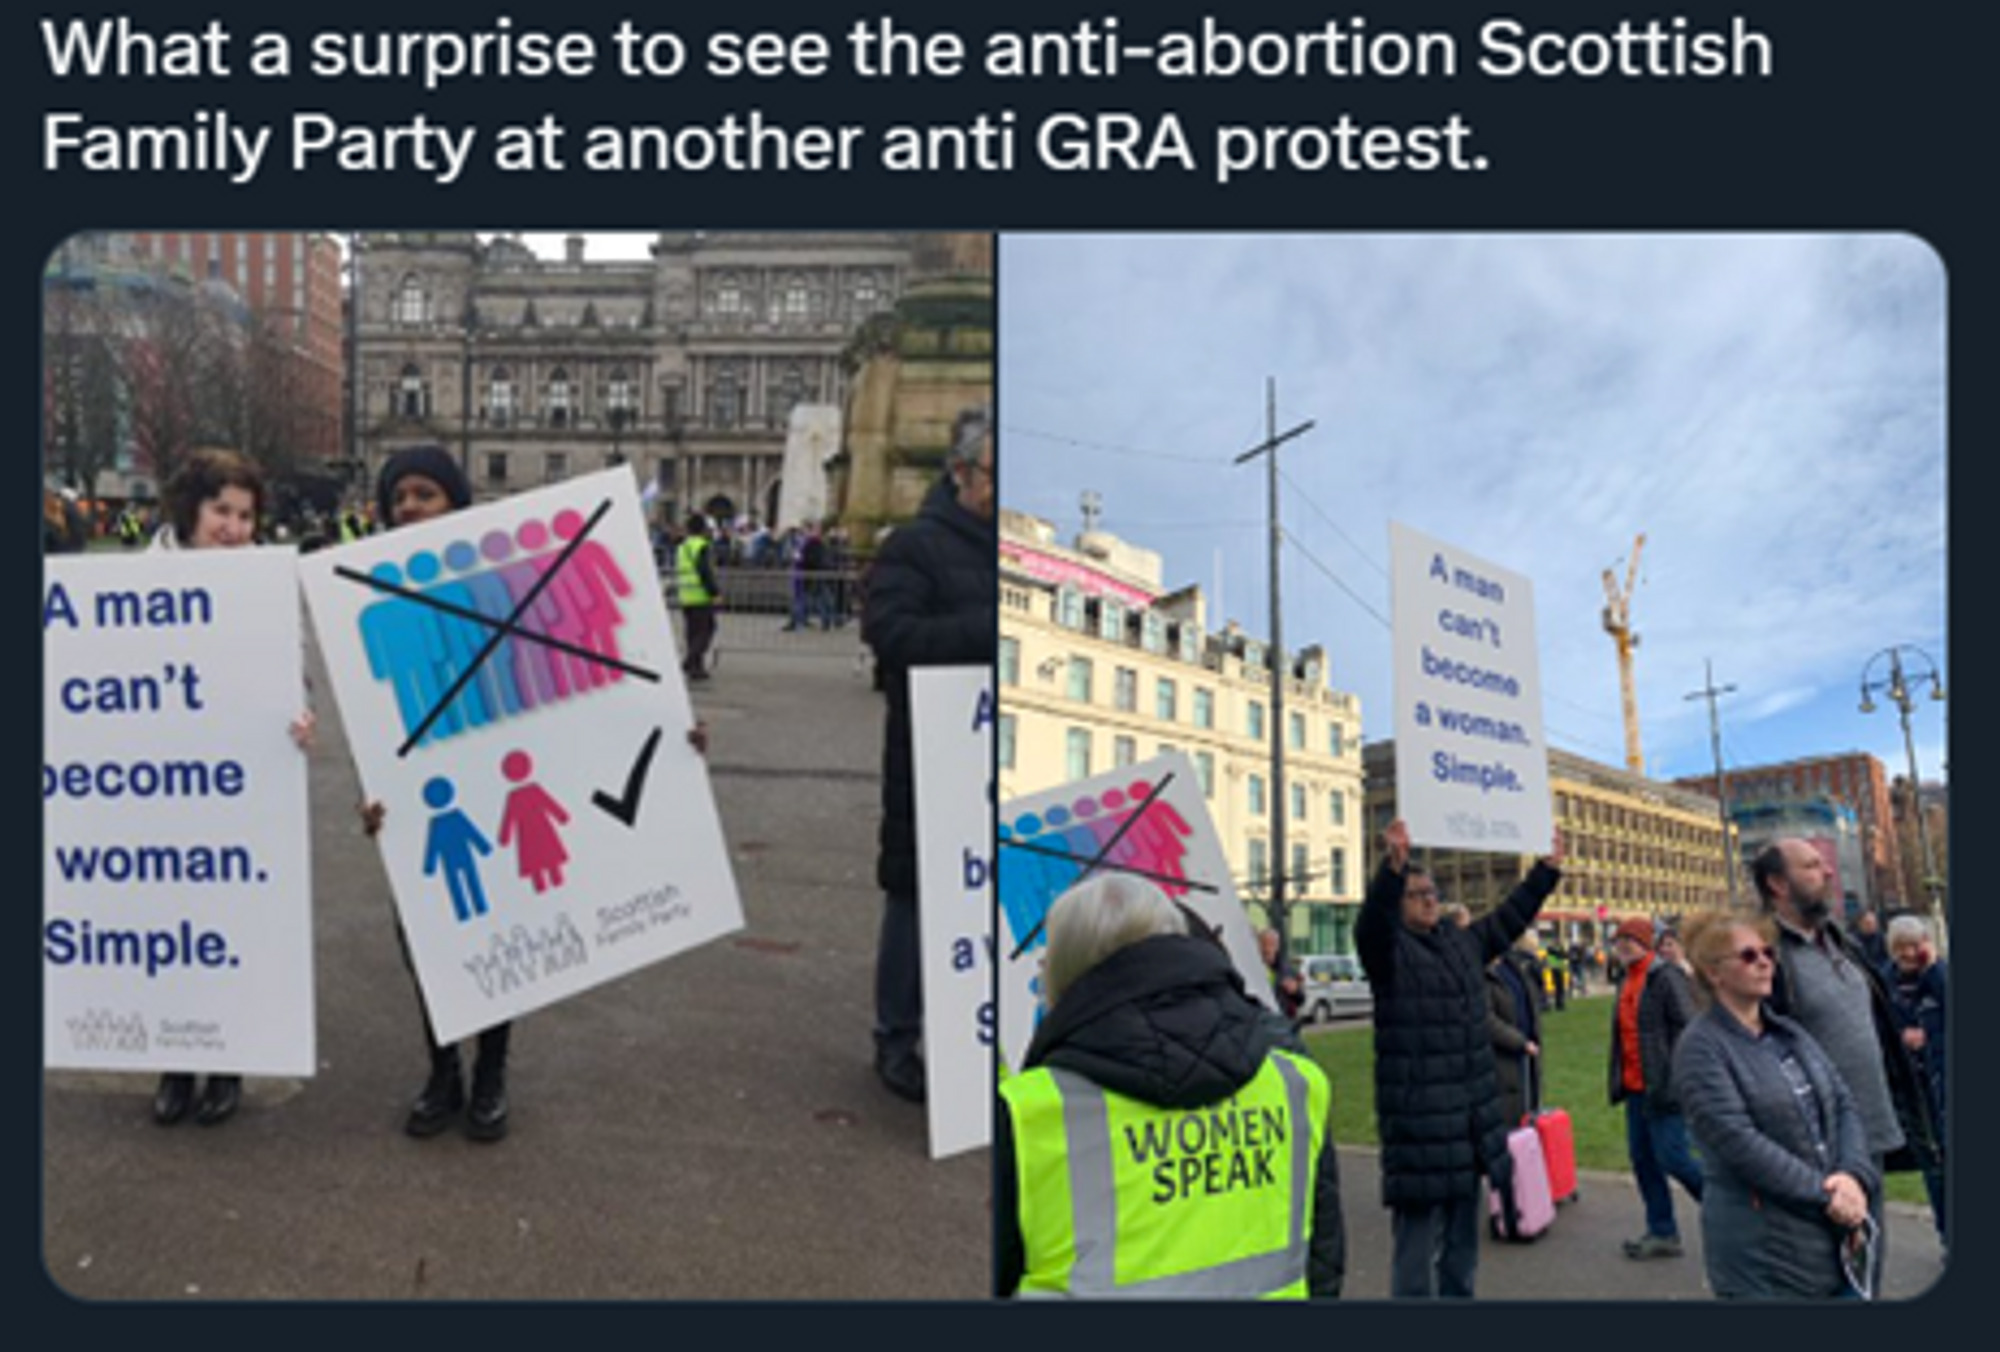 Tweet screenshot, handle cropped, says "What a surprise to see the anti-abortion Scottish Family Party at another anti-GRA protest, with photos depicting the SFP in attendance